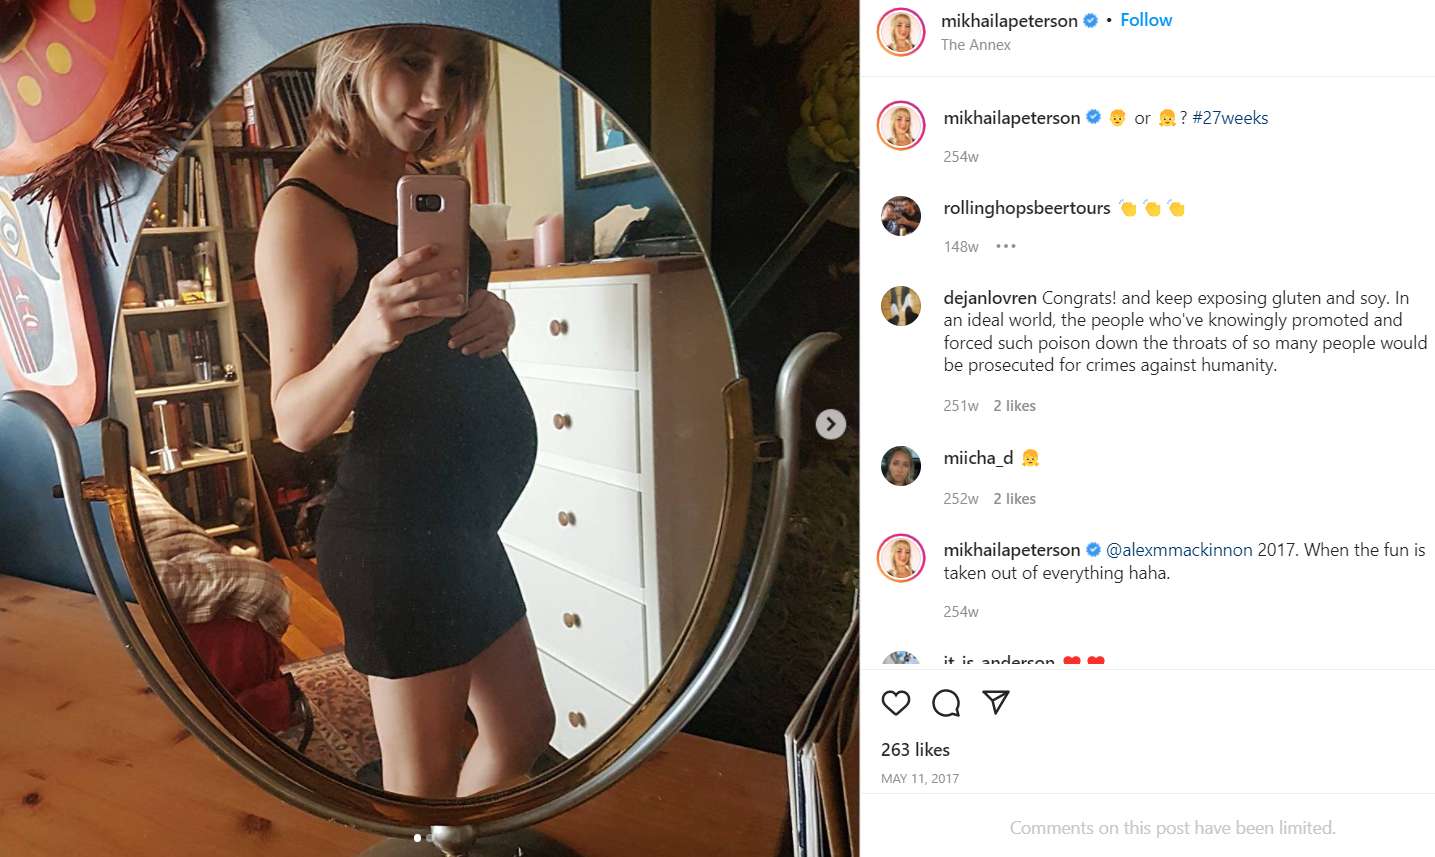 Mikhaila Peterson posted a photo of her pregnancy